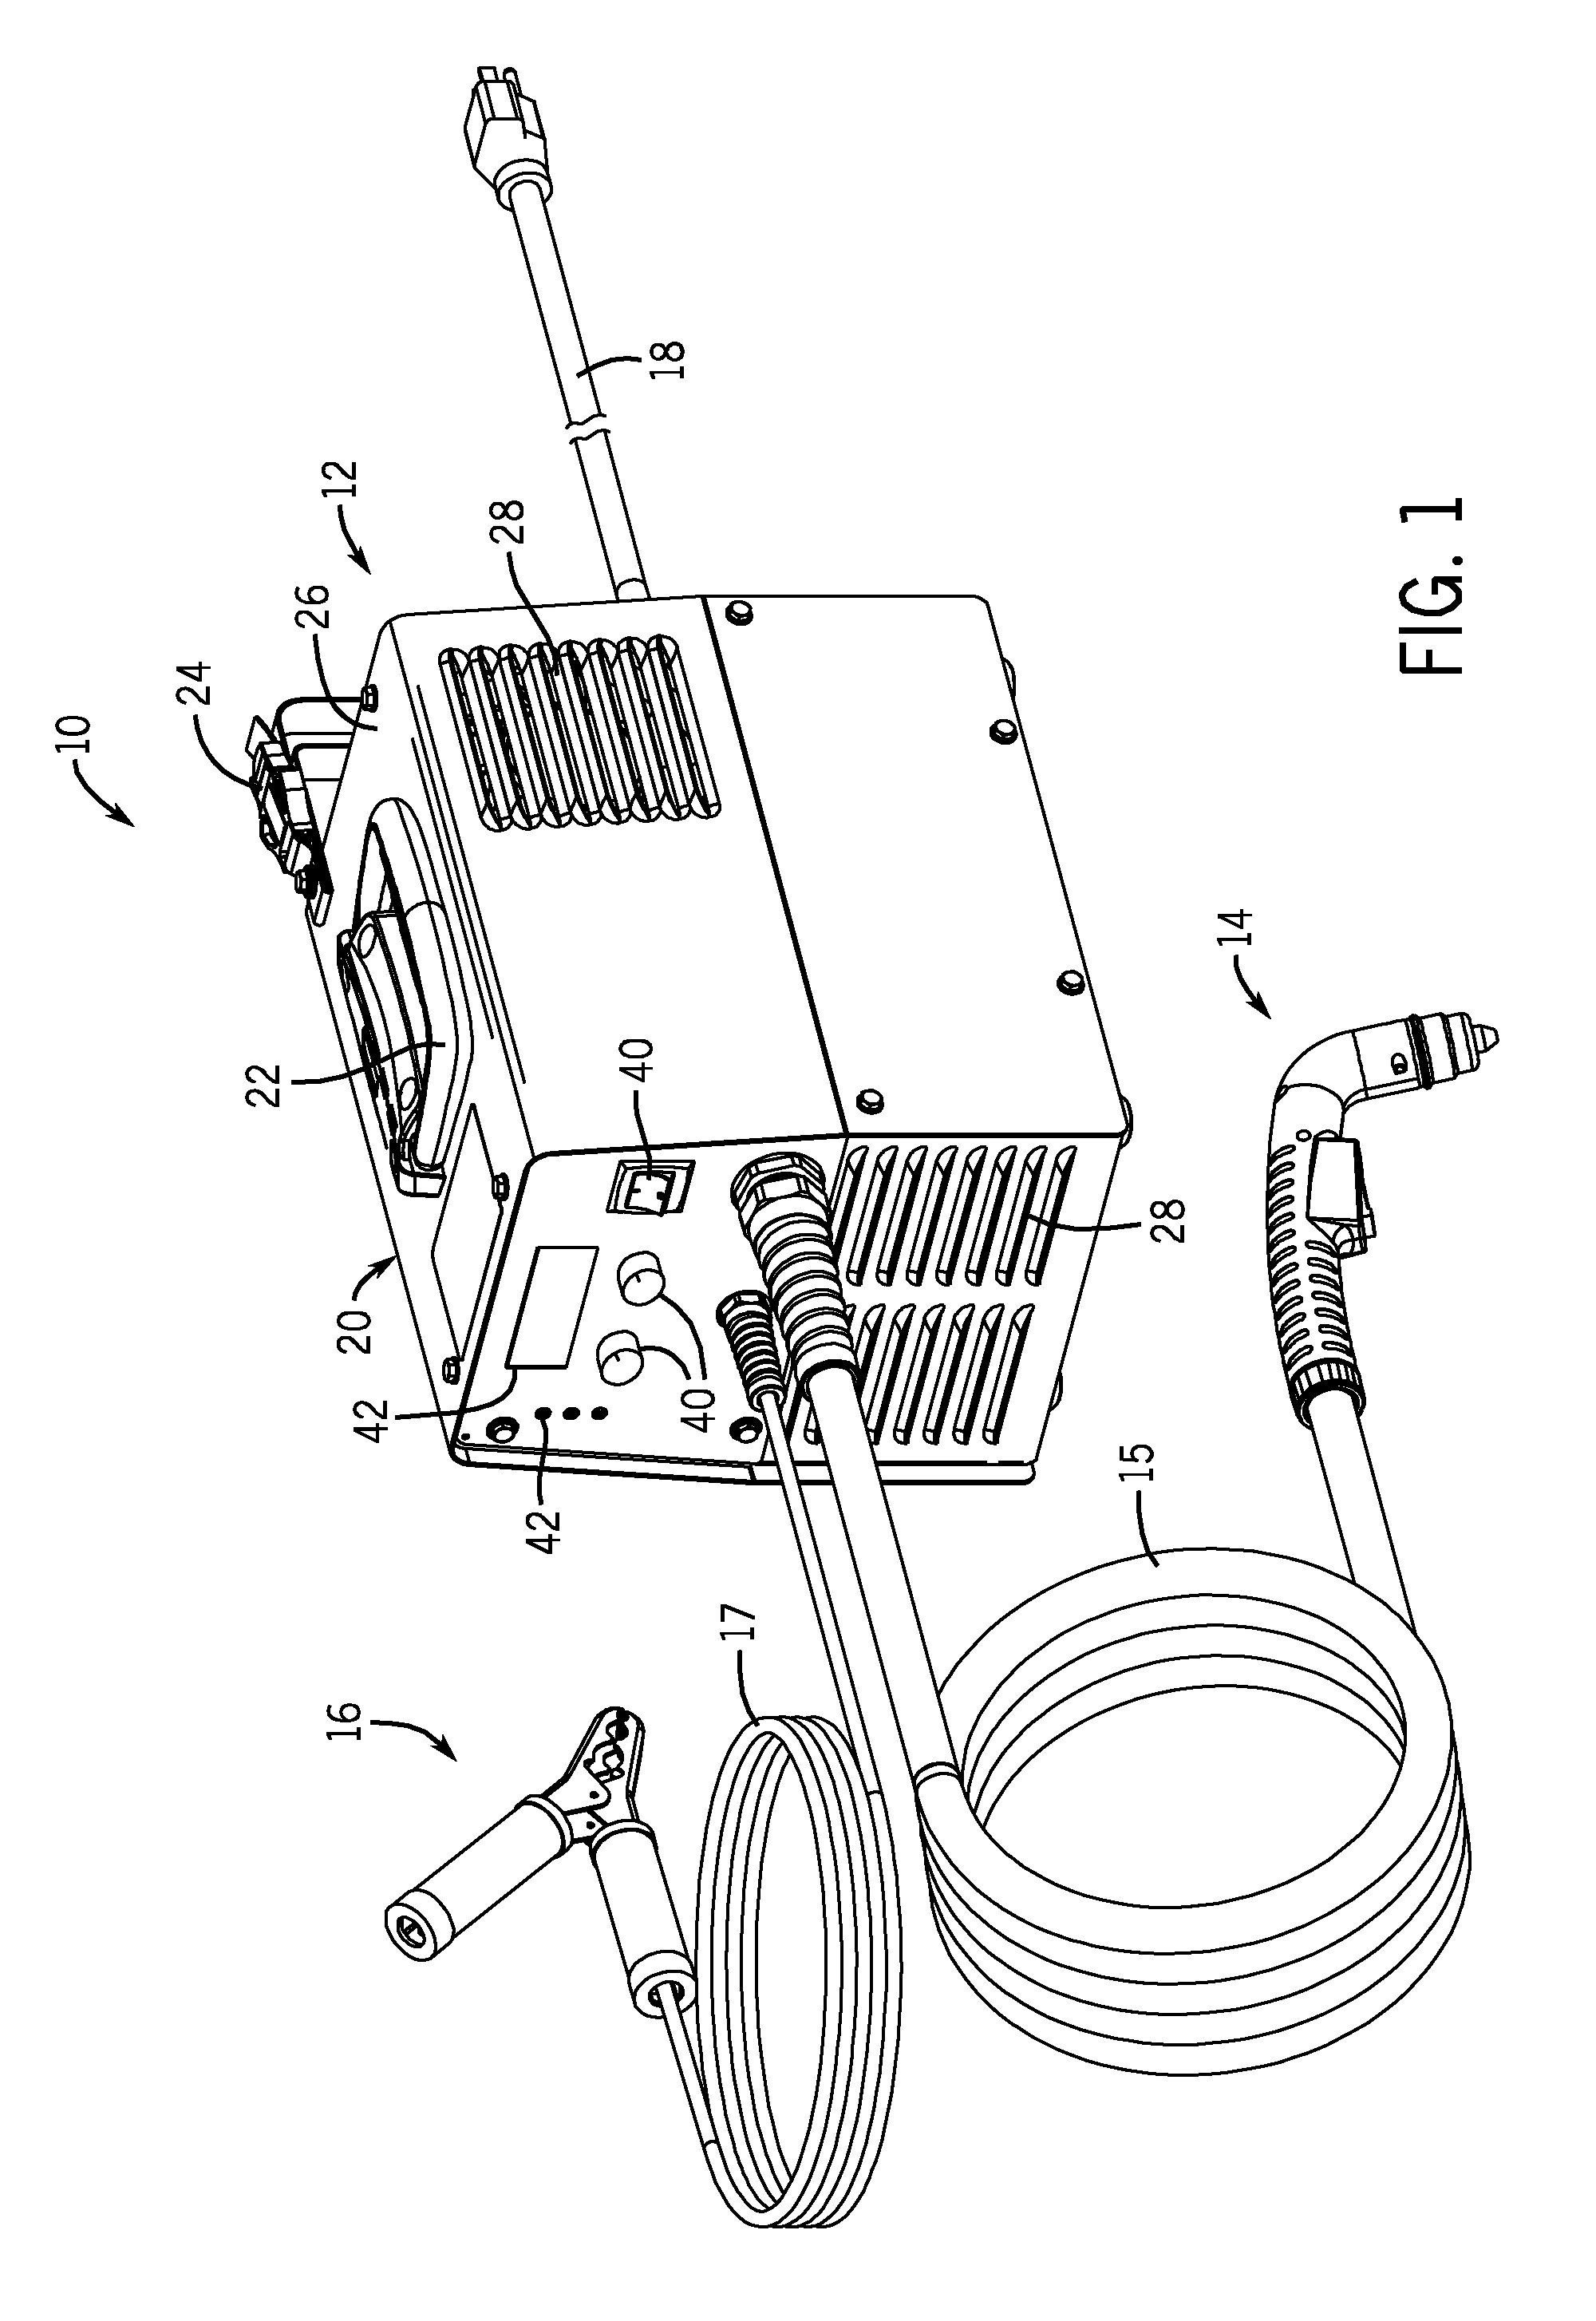 Compressor Profile for Resonance Points System and Method